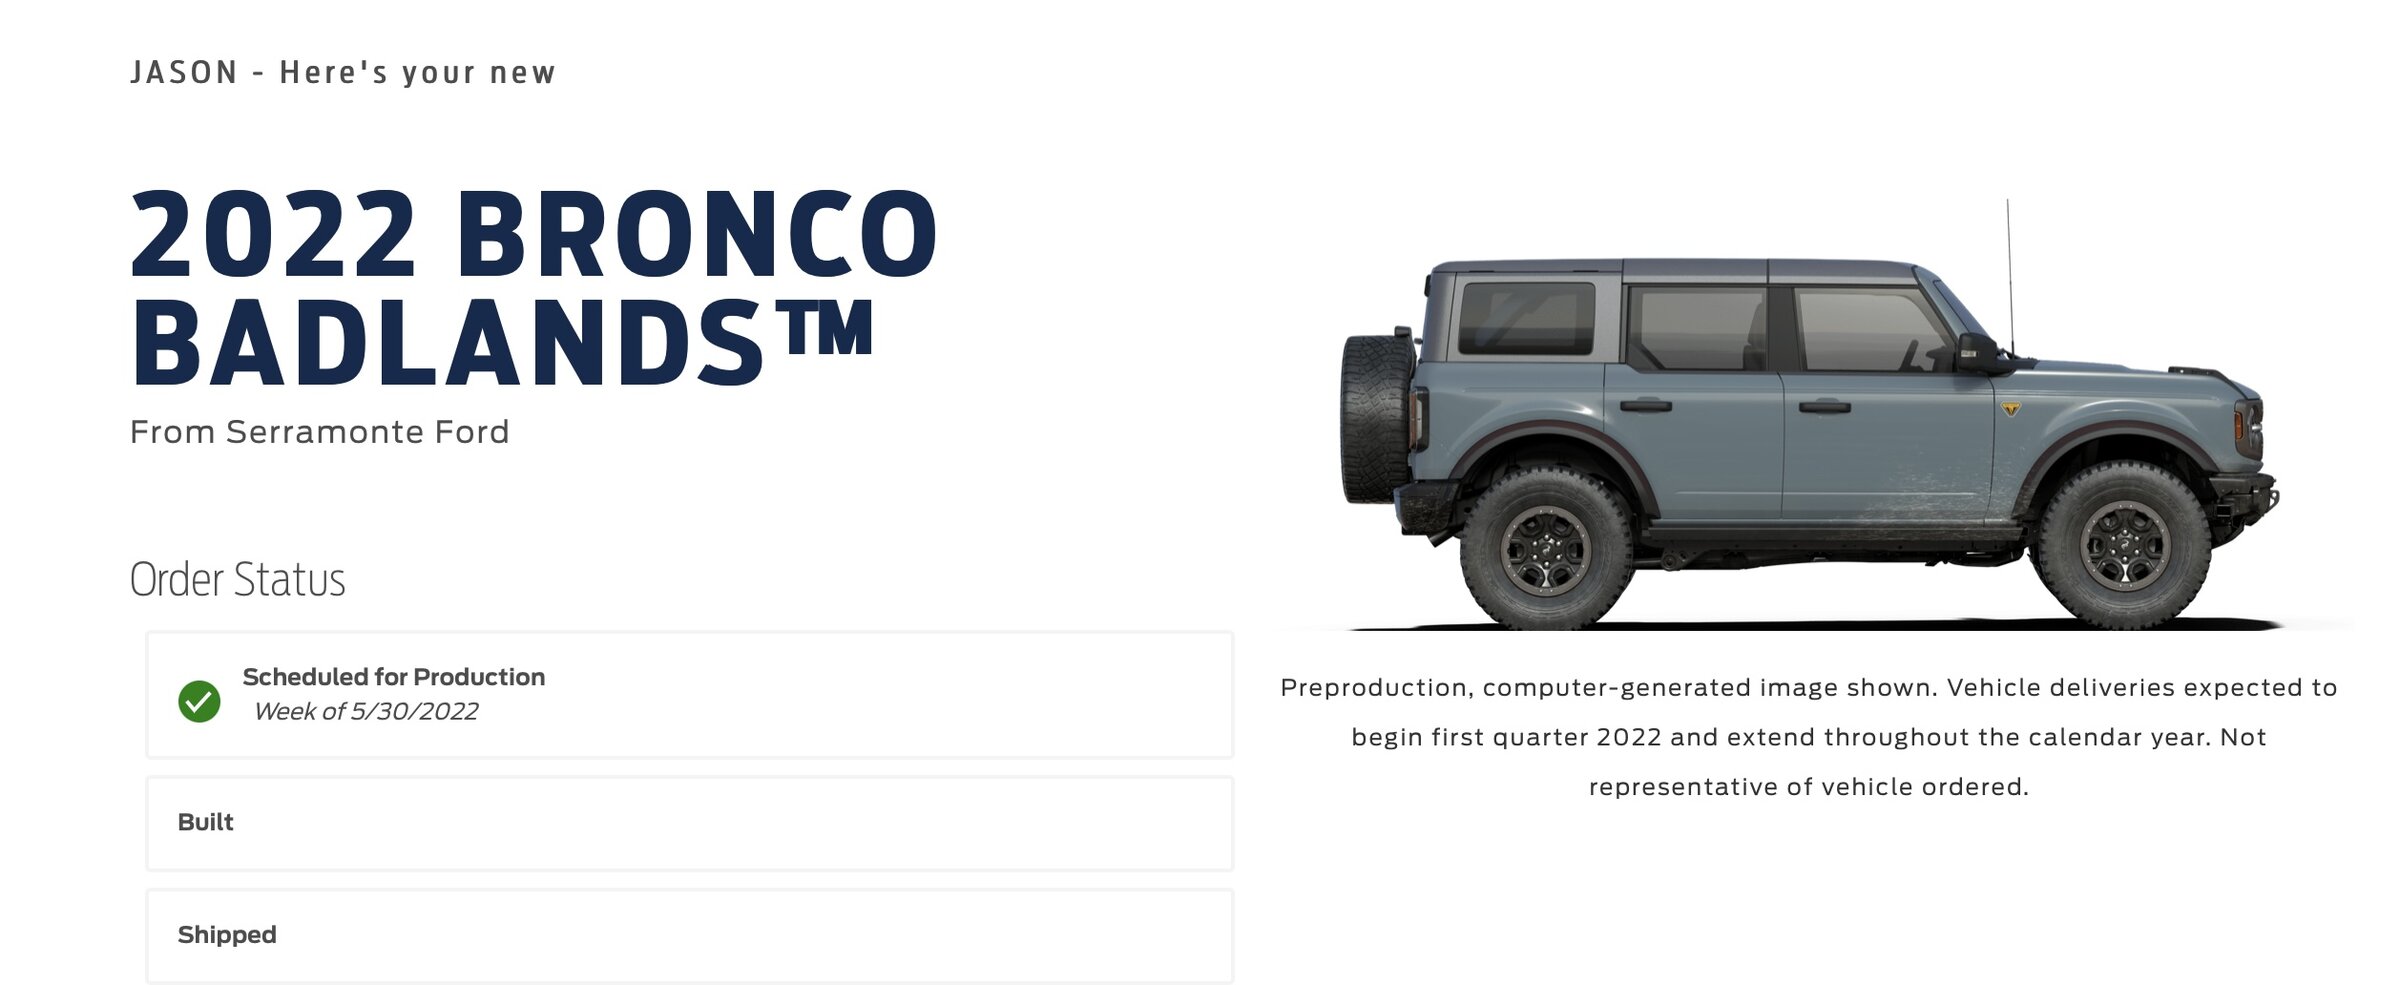 Ford Bronco ⏱ Bronco Scheduling Next Week (4/18) For Build Weeks 5/30-6/27 and 7/11-7/25 1650559139386